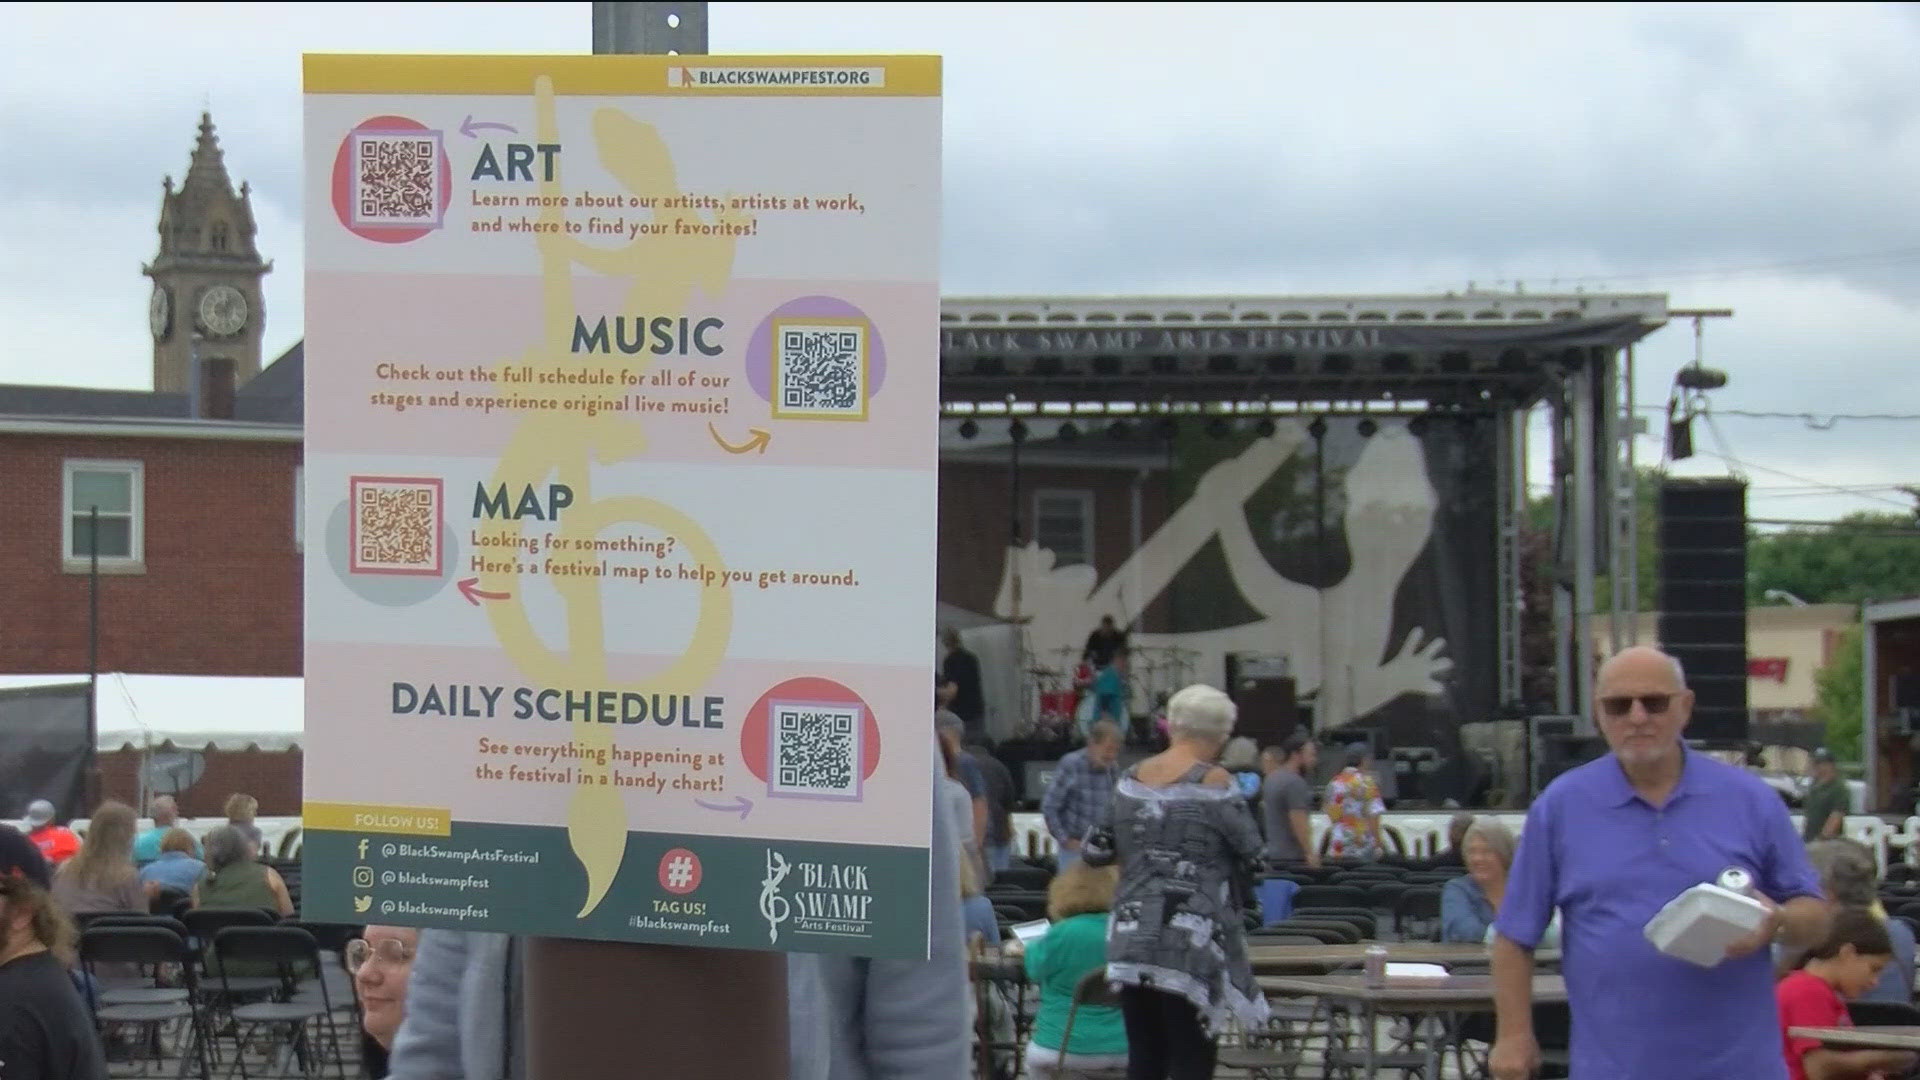 The free, annual 3-day public arts festival includes talent from local to international musicians.